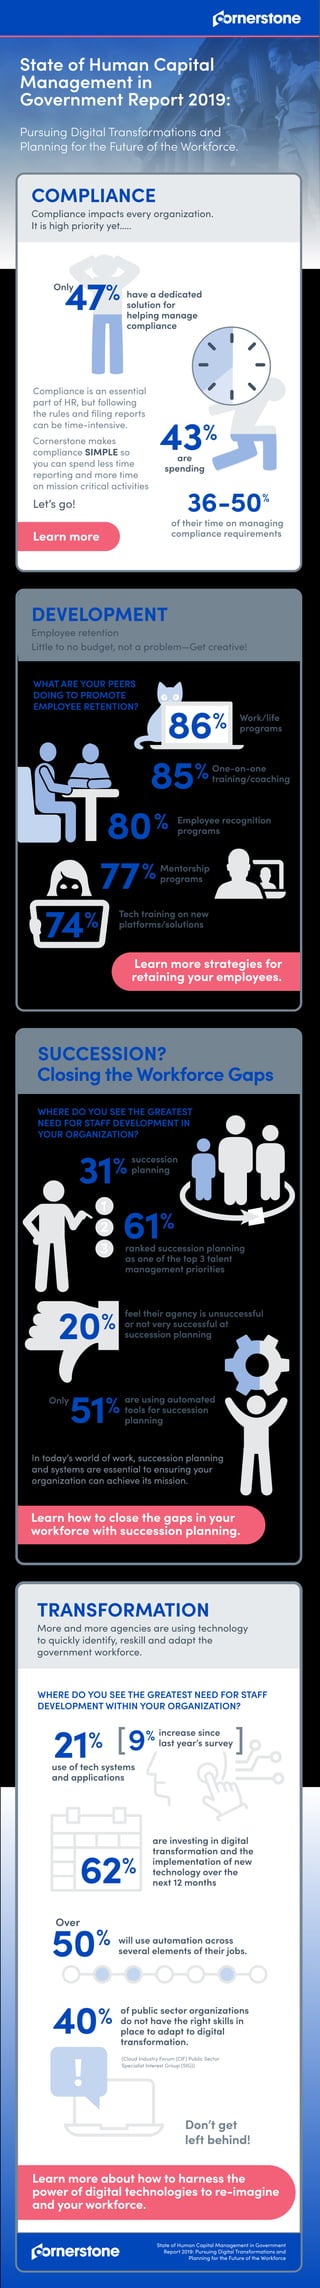 State of Human Capital
Management in
Government Report 2019:
Pursuing Digital Transformations and
Planning for the Future of the Workforce.
Learn how to close the gaps in your
workforce with succession planning.
TRANSFORMATION
More and more agencies are using technology
to quickly identify, reskill and adapt the
government workforce.
COMPLIANCE
Compliance impacts every organization.
It is high priority yet…..
Compliance is an essential
part of HR, but following
the rules and ﬁling reports
can be time-intensive.
Cornerstone makes
compliance SIMPLE so
you can spend less time
reporting and more time
on mission critical activities
Let’s go!
have a dedicated
solution for
helping manage
compliance
of their time on managing
compliance requirements
DEVELOPMENT
Employee retention
Little to no budget, not a problem—Get creative!
Learn more strategies for
retaining your employees.
36-50%
Closing the Workforce Gaps
61%
ranked succession planning
as one of the top 3 talent
management priorities
20%
feel their agency is unsuccessful
or not very successful at
succession planning
In today’s world of work, succession planning
and systems are essential to ensuring your
organization can achieve its mission.
Don’t get
left behind!
Learn more
85%
are
spending
43%
80%
74%
77%
WHERE DO YOU SEE THE GREATEST
NEED FOR STAFF DEVELOPMENT IN
YOUR ORGANIZATION?
succession
planning
31%
51% are using automated
tools for succession
planning
Only
1
2
3
SUCCESSION?
WHERE DO YOU SEE THE GREATEST NEED FOR STAFF
DEVELOPMENT WITHIN YOUR ORGANIZATION?
Learn more about how to harness the
power of digital technologies to re-imagine
and your workforce.
50%
Over
will use automation across
several elements of their jobs.
47%Only
State of Human Capital Management in Government
Report 2019: Pursuing Digital Transformations and
Planning for the Future of the Workforce
21%
use of tech systems
and applications
9% increase since
last year’s survey[ ]
62%
are investing in digital
transformation and the
implementation of new
technology over the
next 12 months
40%
!
of public sector organizations
do not have the right skills in
place to adapt to digital
transformation.
(Cloud Industry Forum (CIF) Public Sector
Specialist Interest Group (SIG))
One-on-one
training/coaching
Employee recognition
programs
Mentorship
programs
86% Work/life
programs
WHAT ARE YOUR PEERS
DOING TO PROMOTE
EMPLOYEE RETENTION?
Tech training on new
platforms/solutions
 